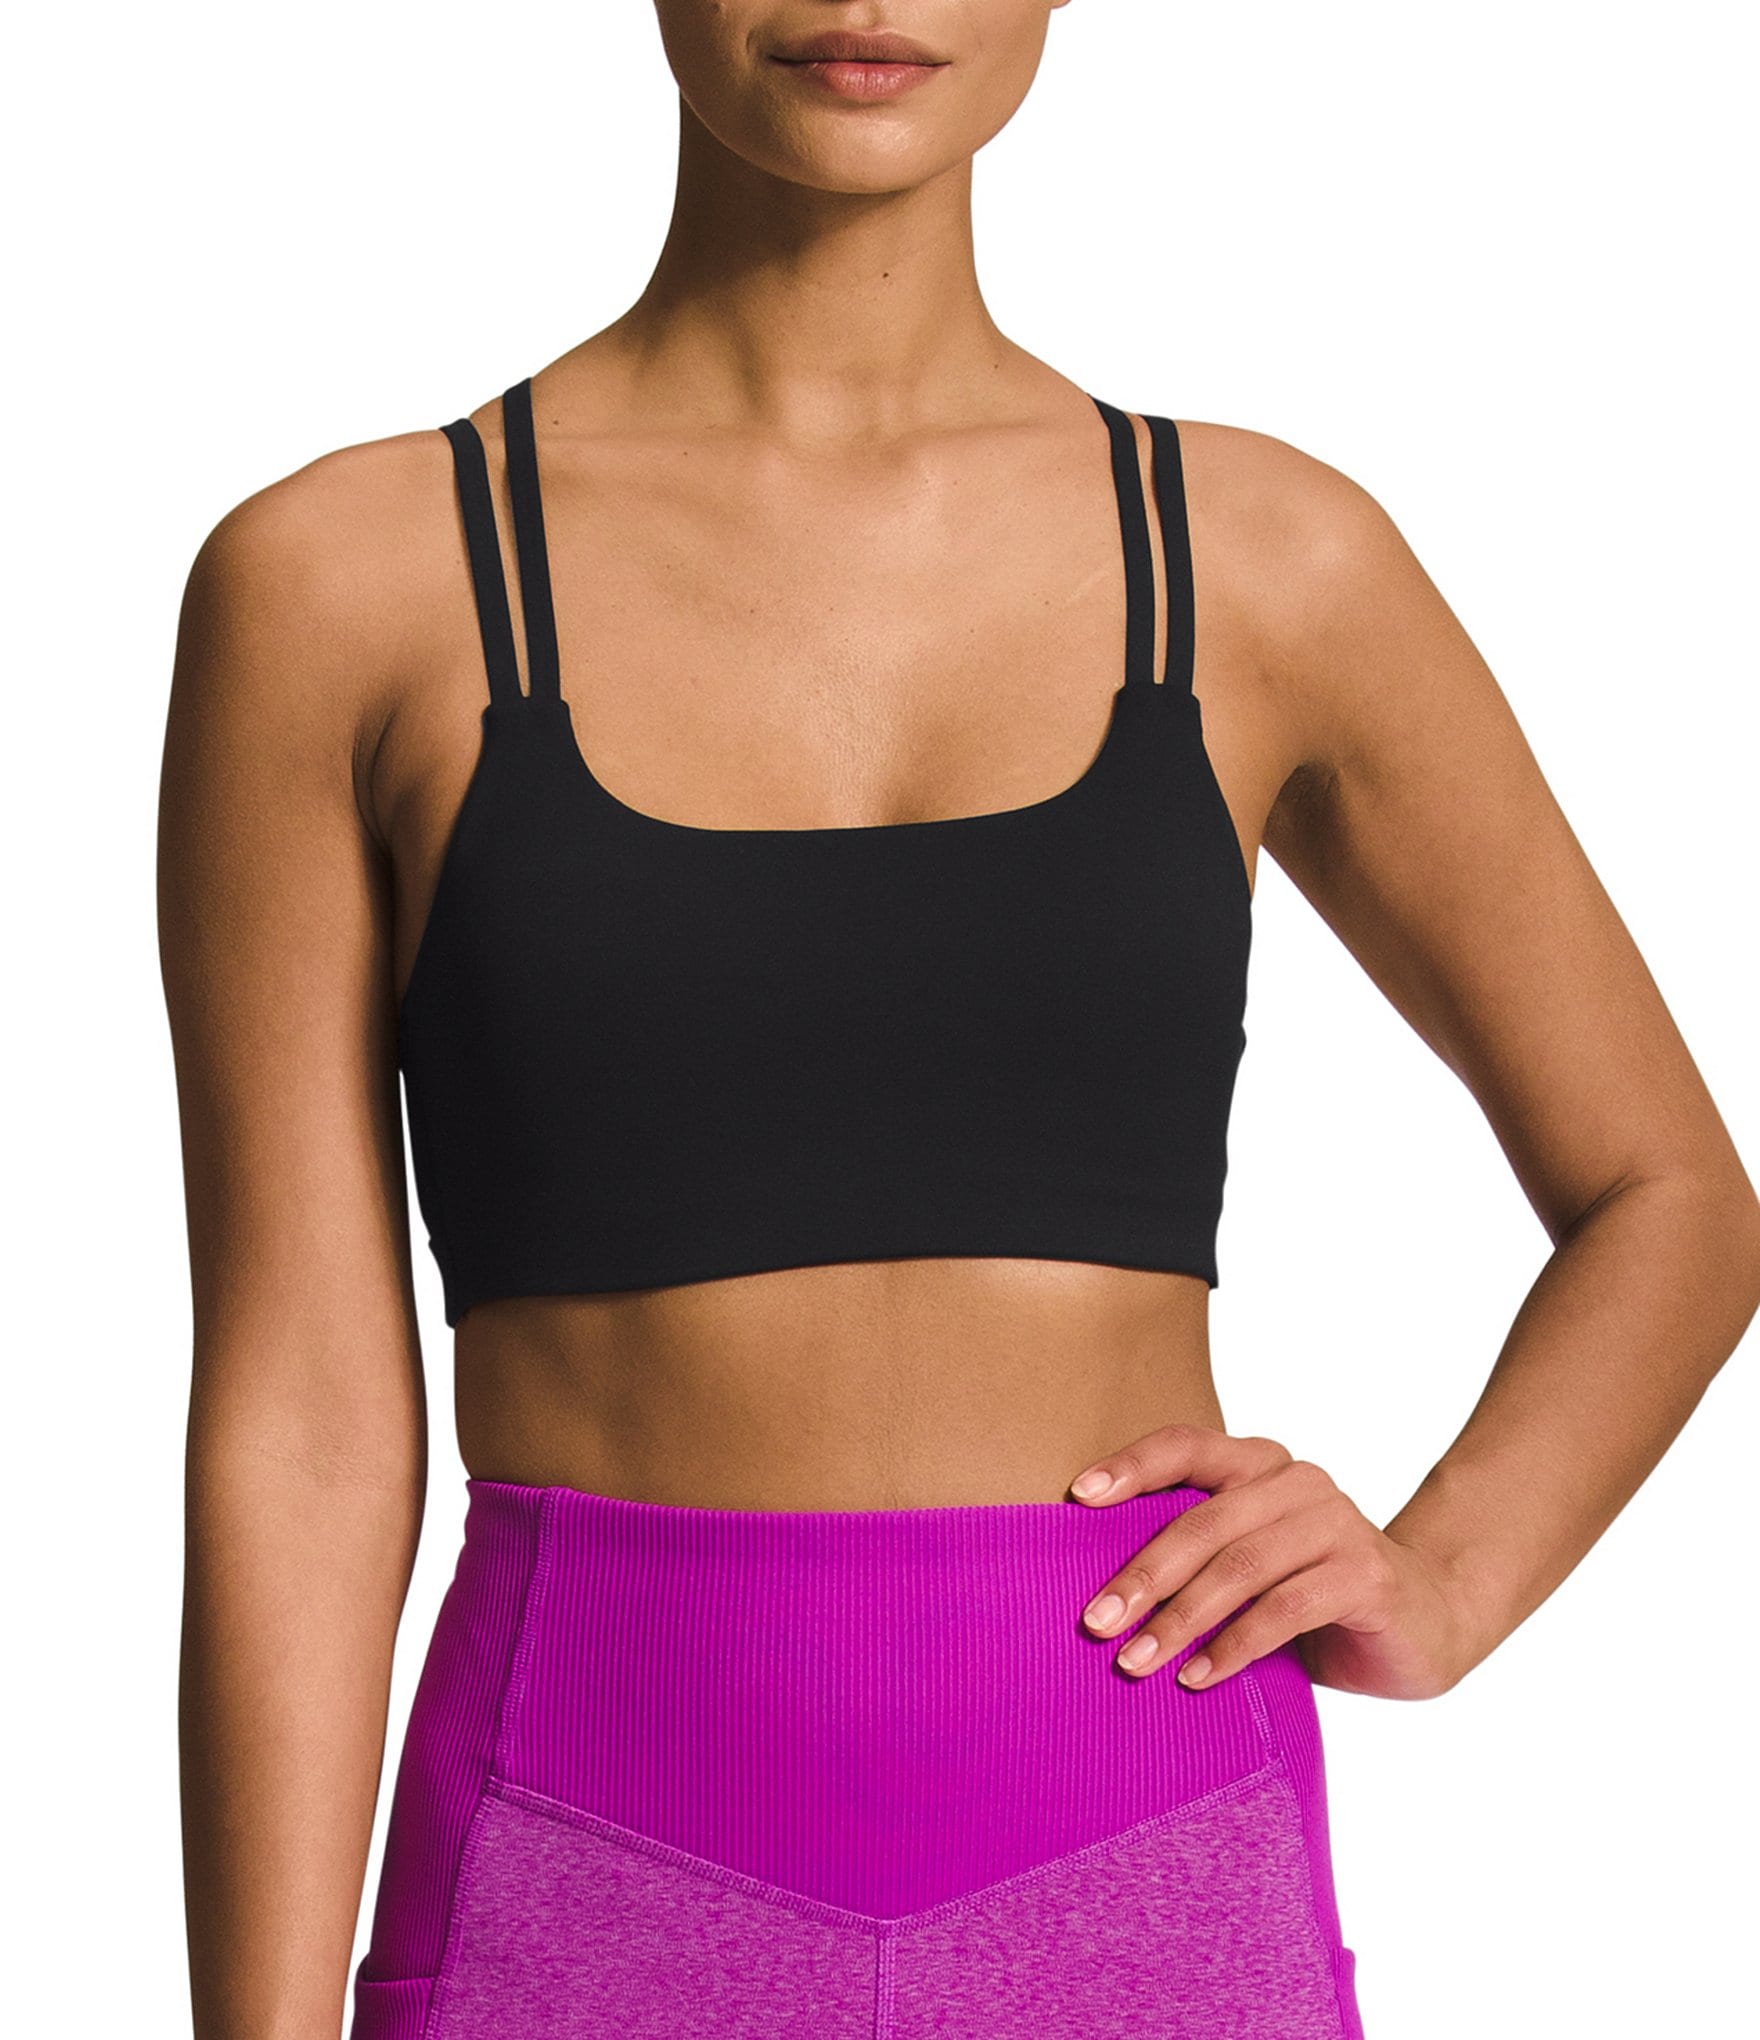 THE NORTH FACE Women's Beyond The Wall Natural Fiber Bra